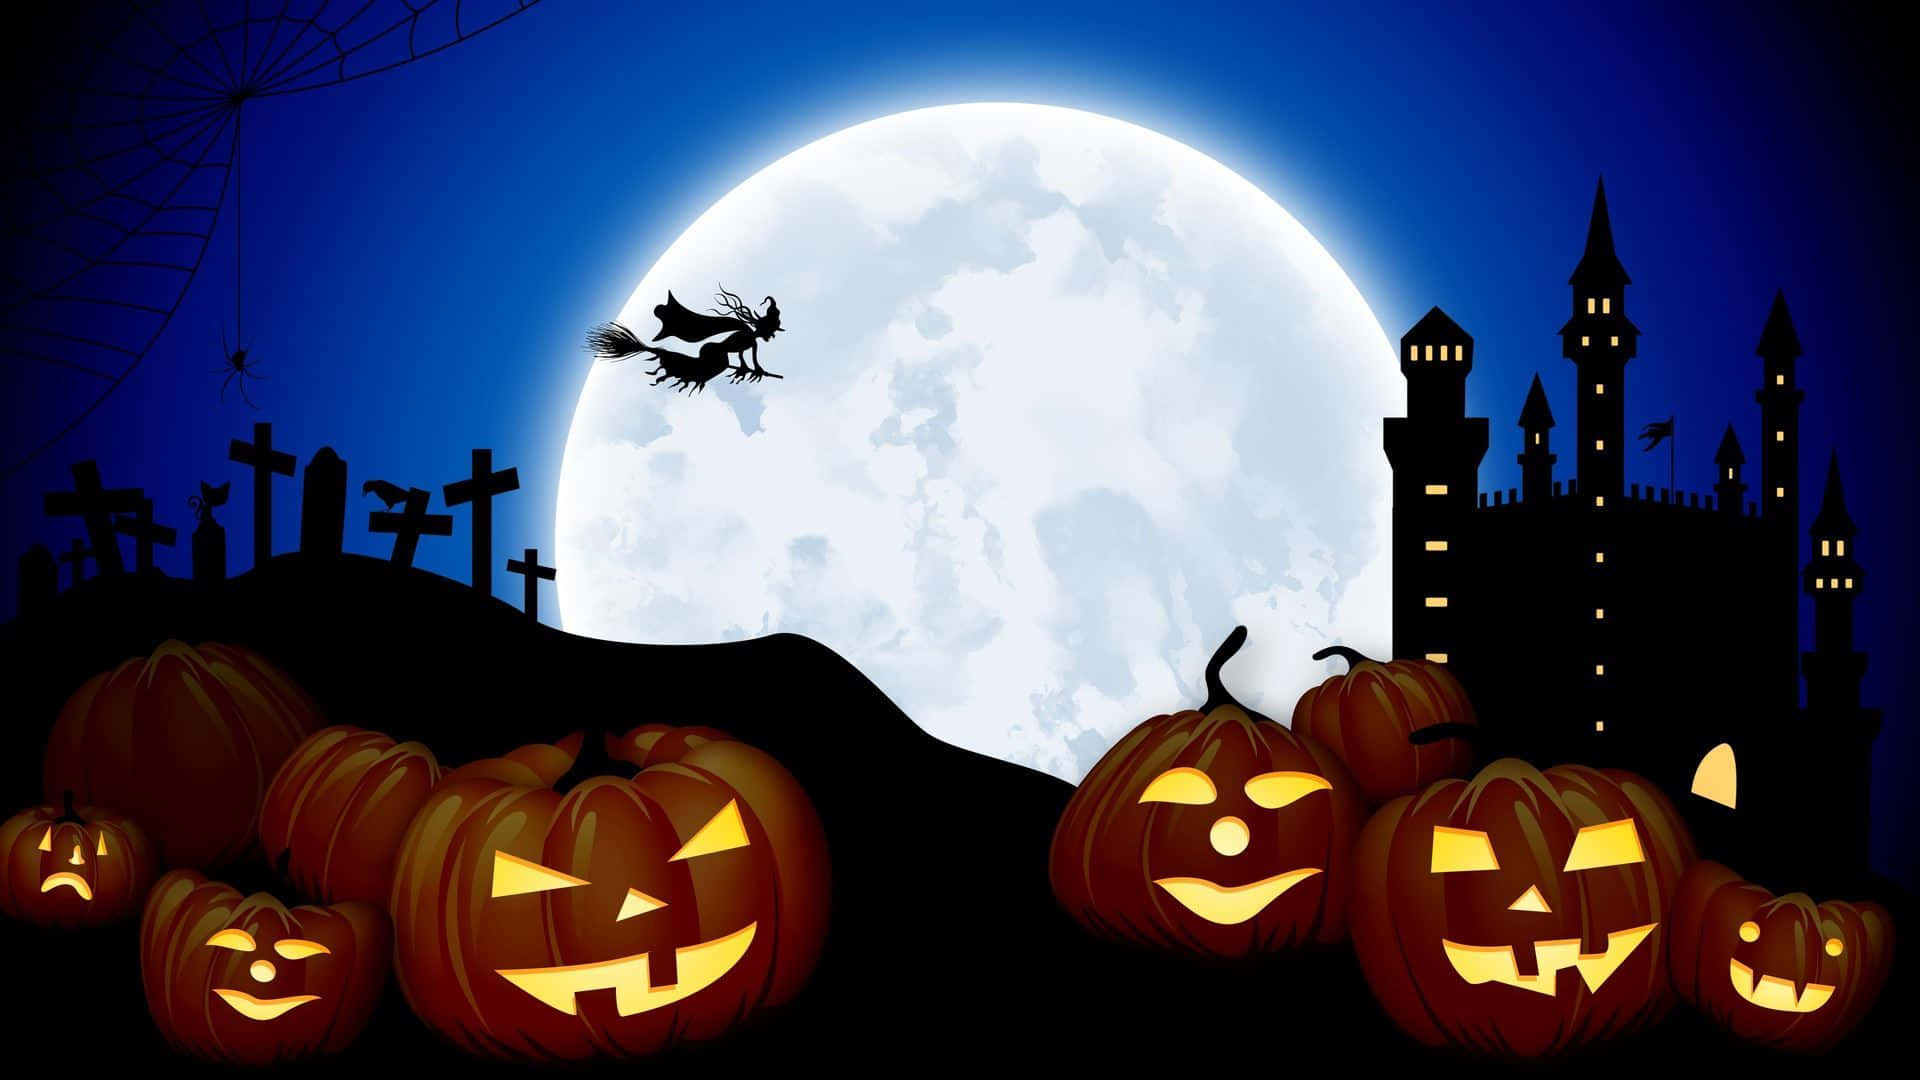 Halloween Pumpkins And Castle With Full Moon Wallpaper